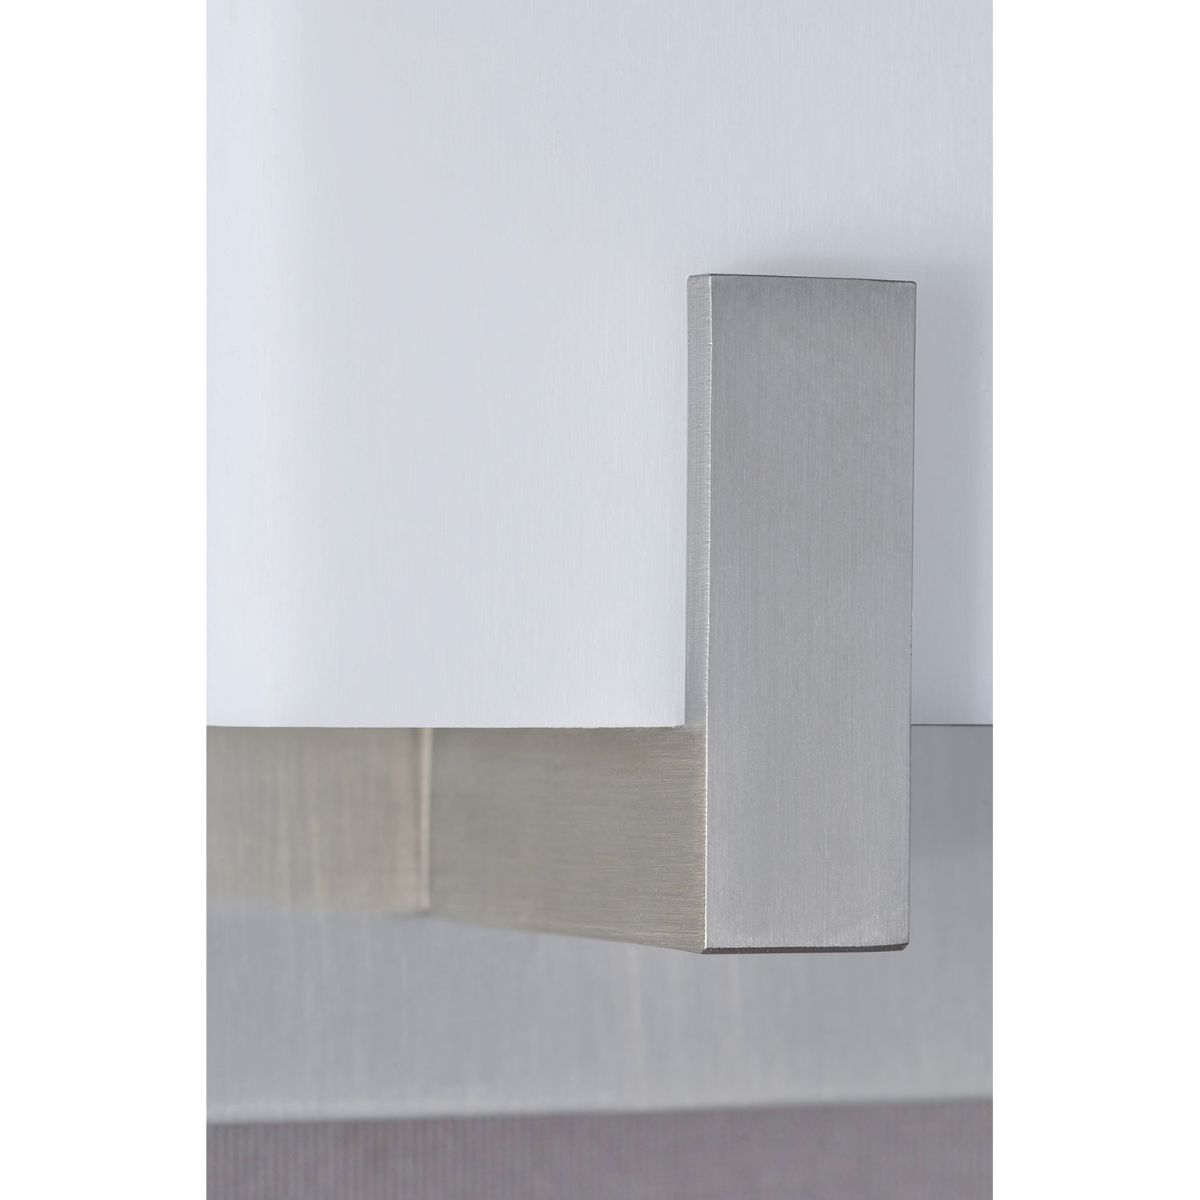 Sinclair 18 in. LED Flush Mount Sconce Satin Nickel Finish